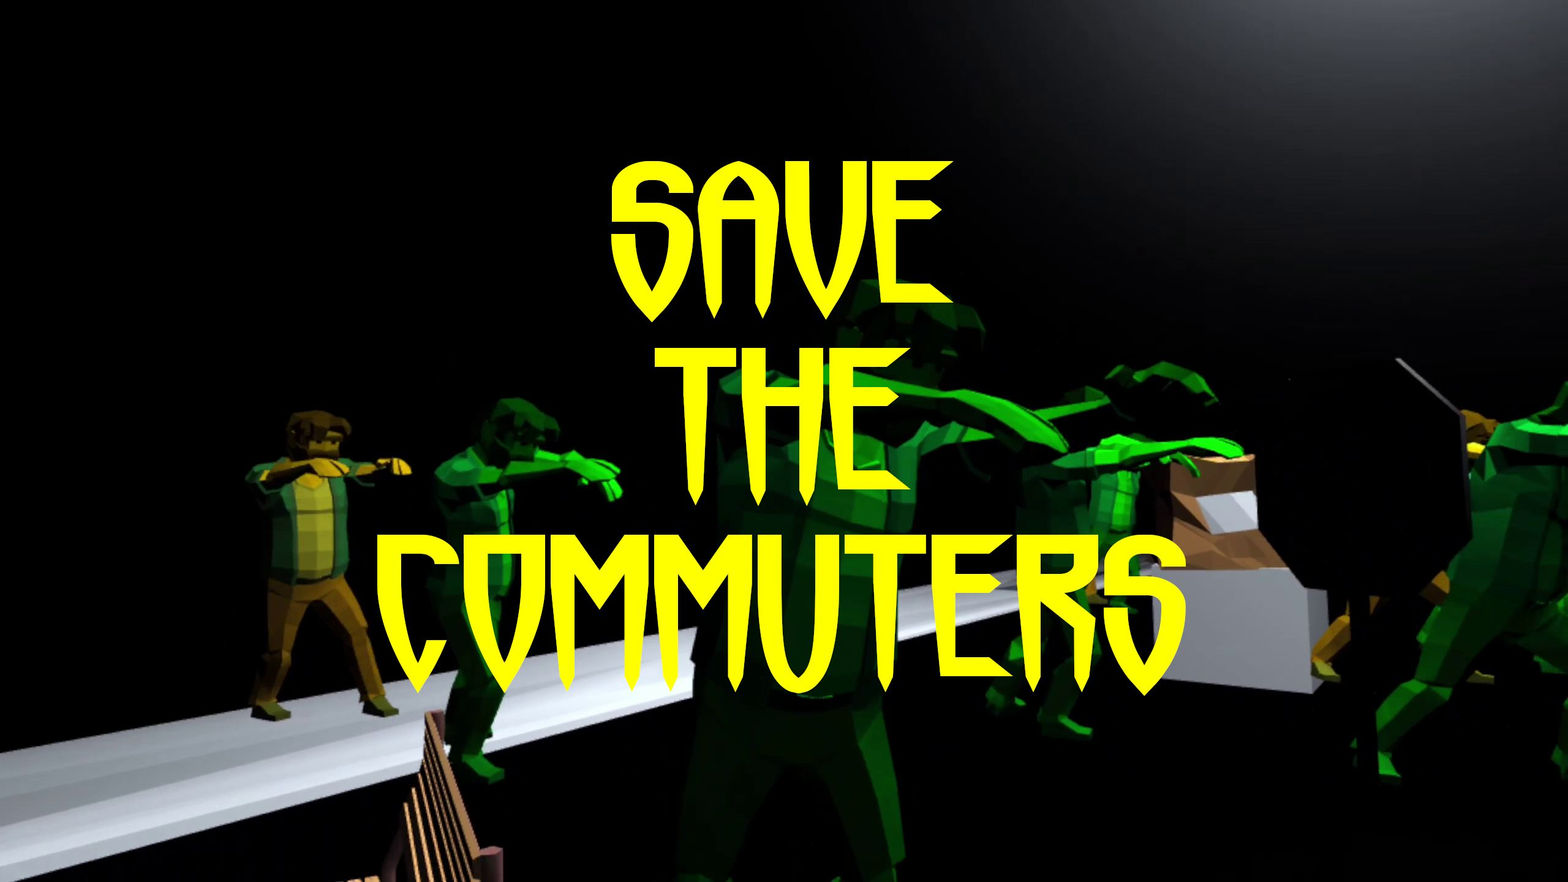 SAVE THE COMMUTERS